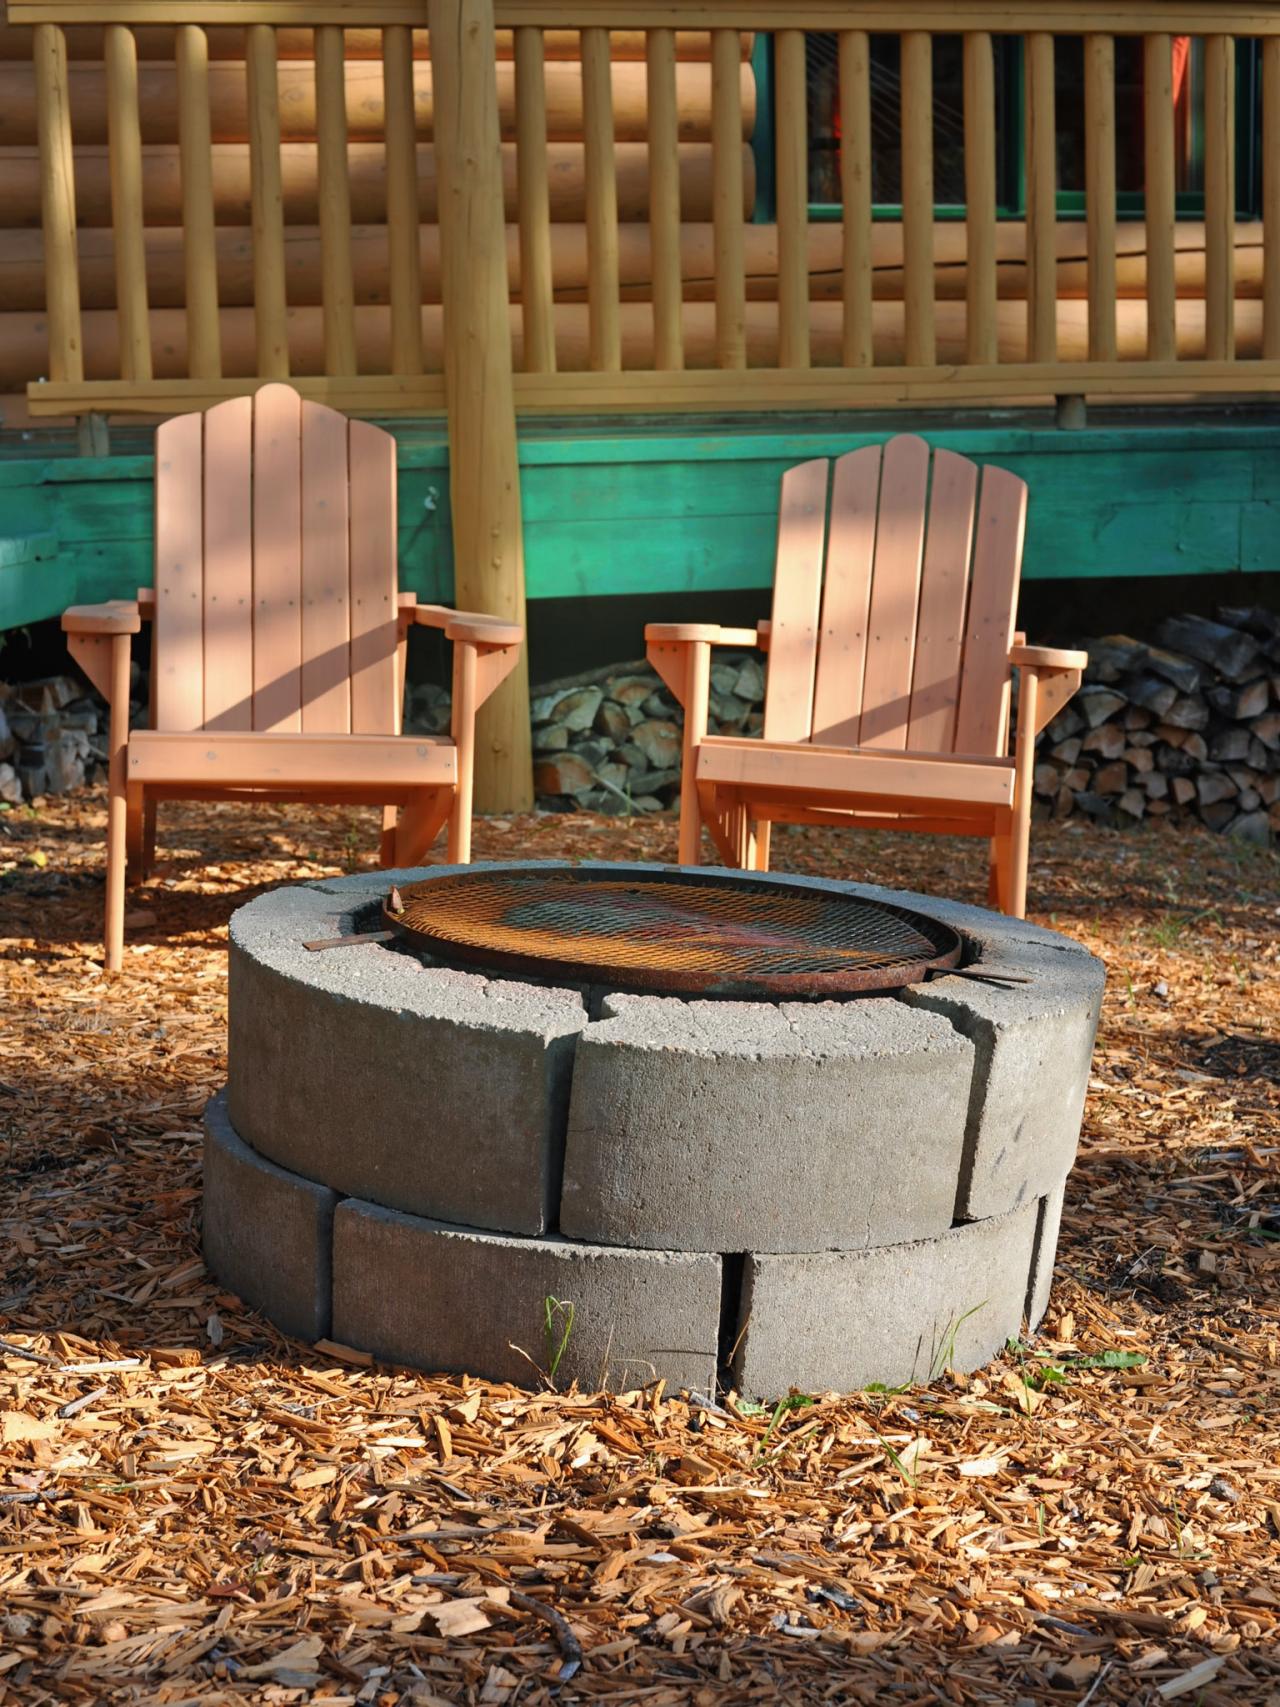 Cinder Block Fire Pits Design Ideas, How Many Wall Blocks To Make A Fire Pit